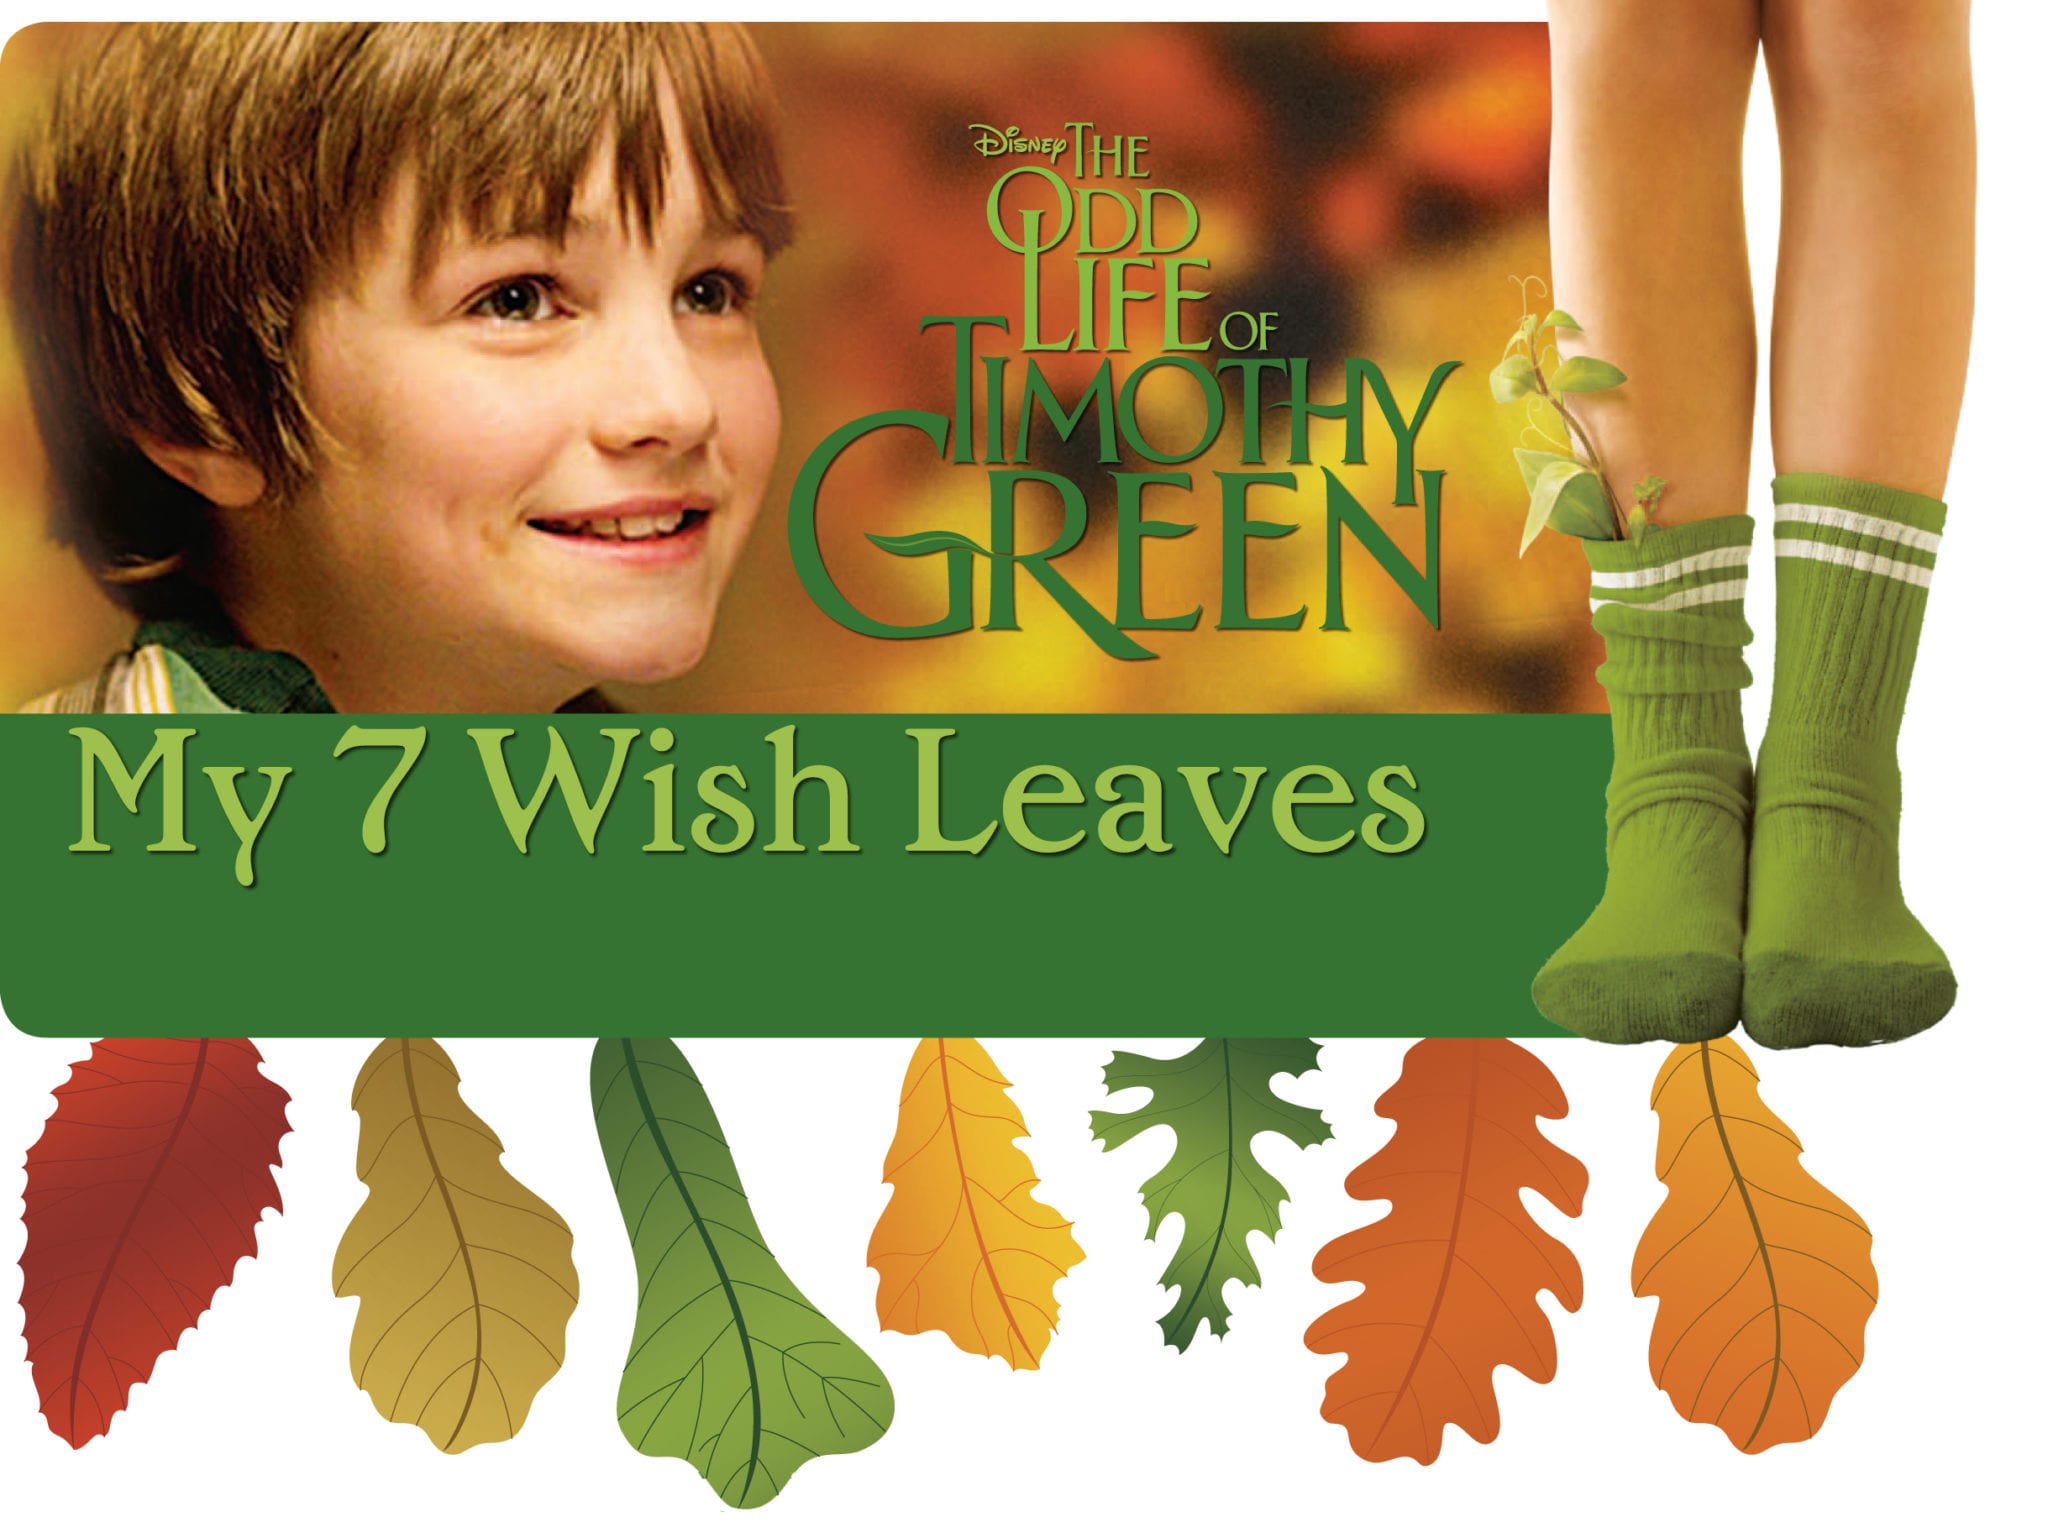 Make Your Own Wish Leaves